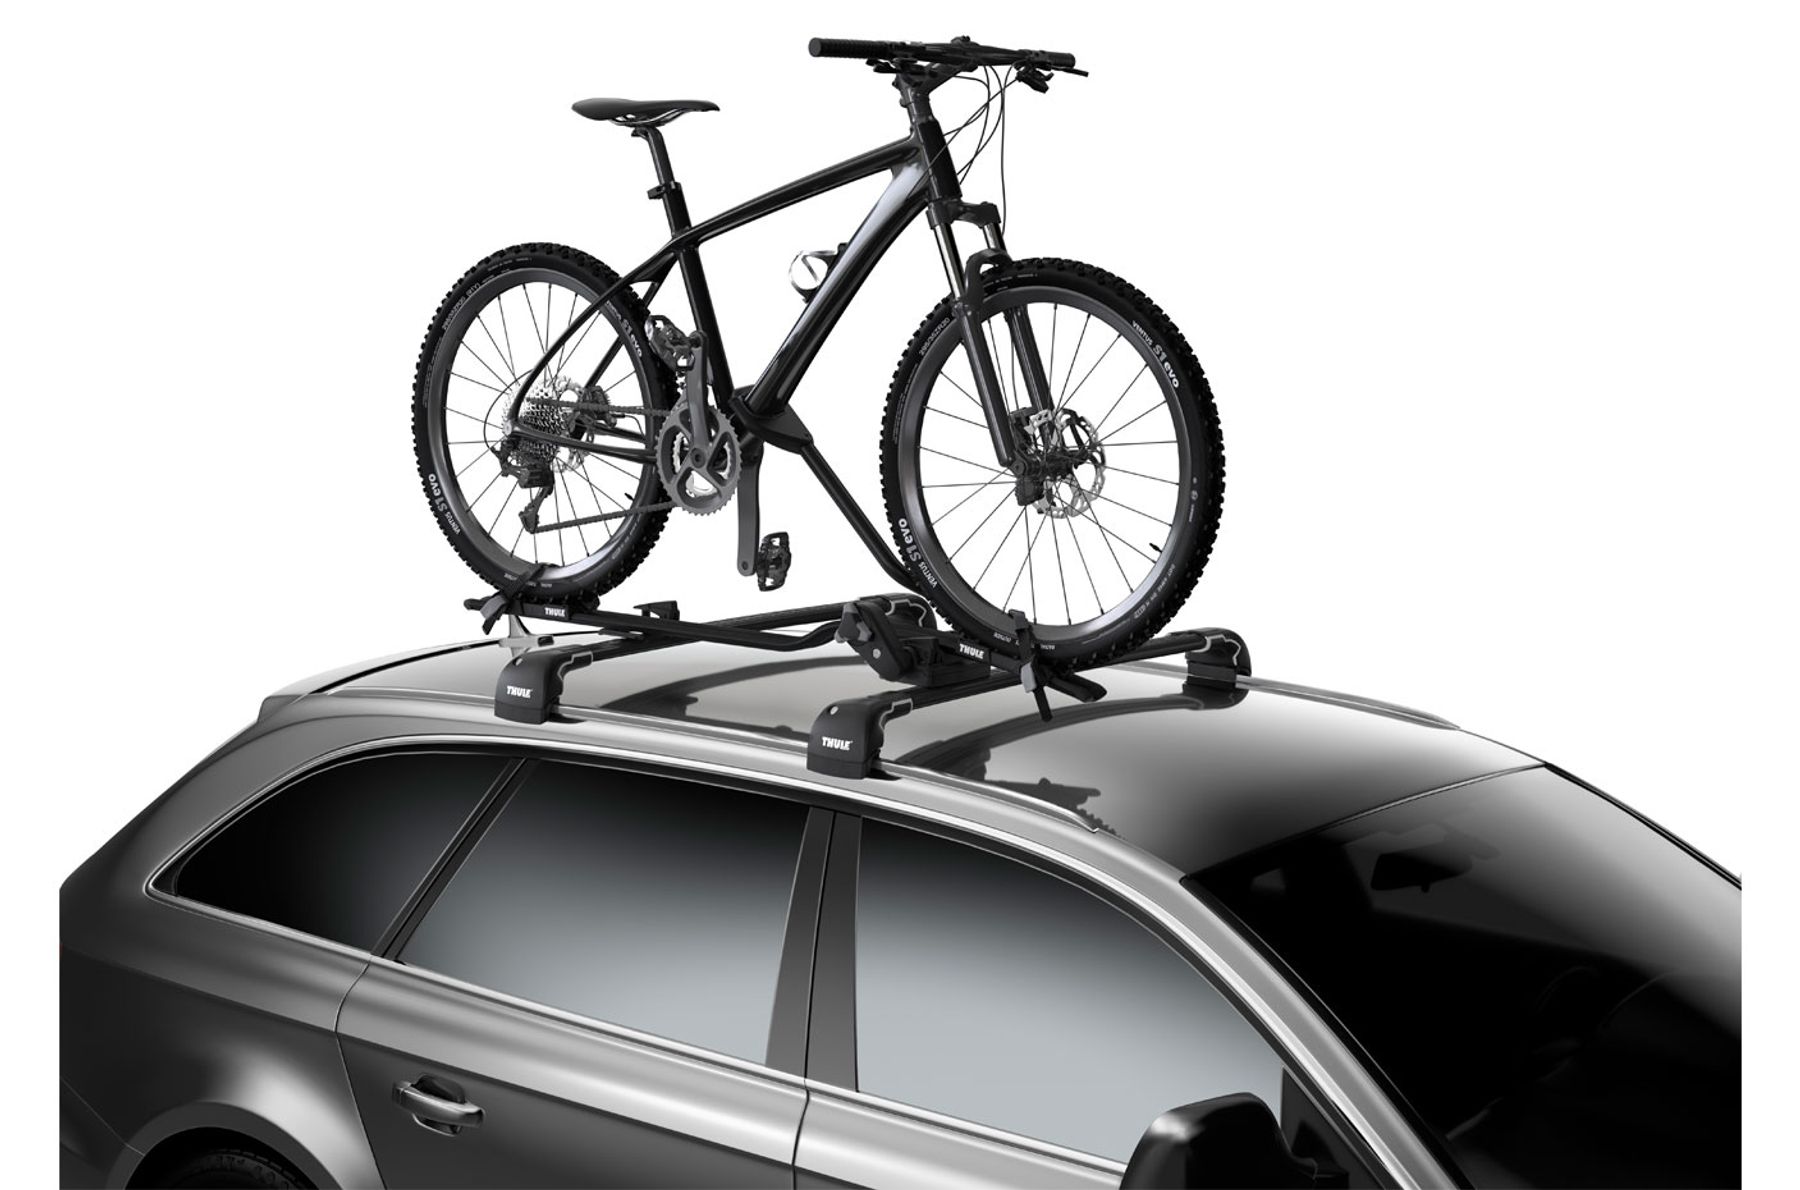 Upright Roof Mount Bike Rack with Anti-theft Lock Free Shipping 